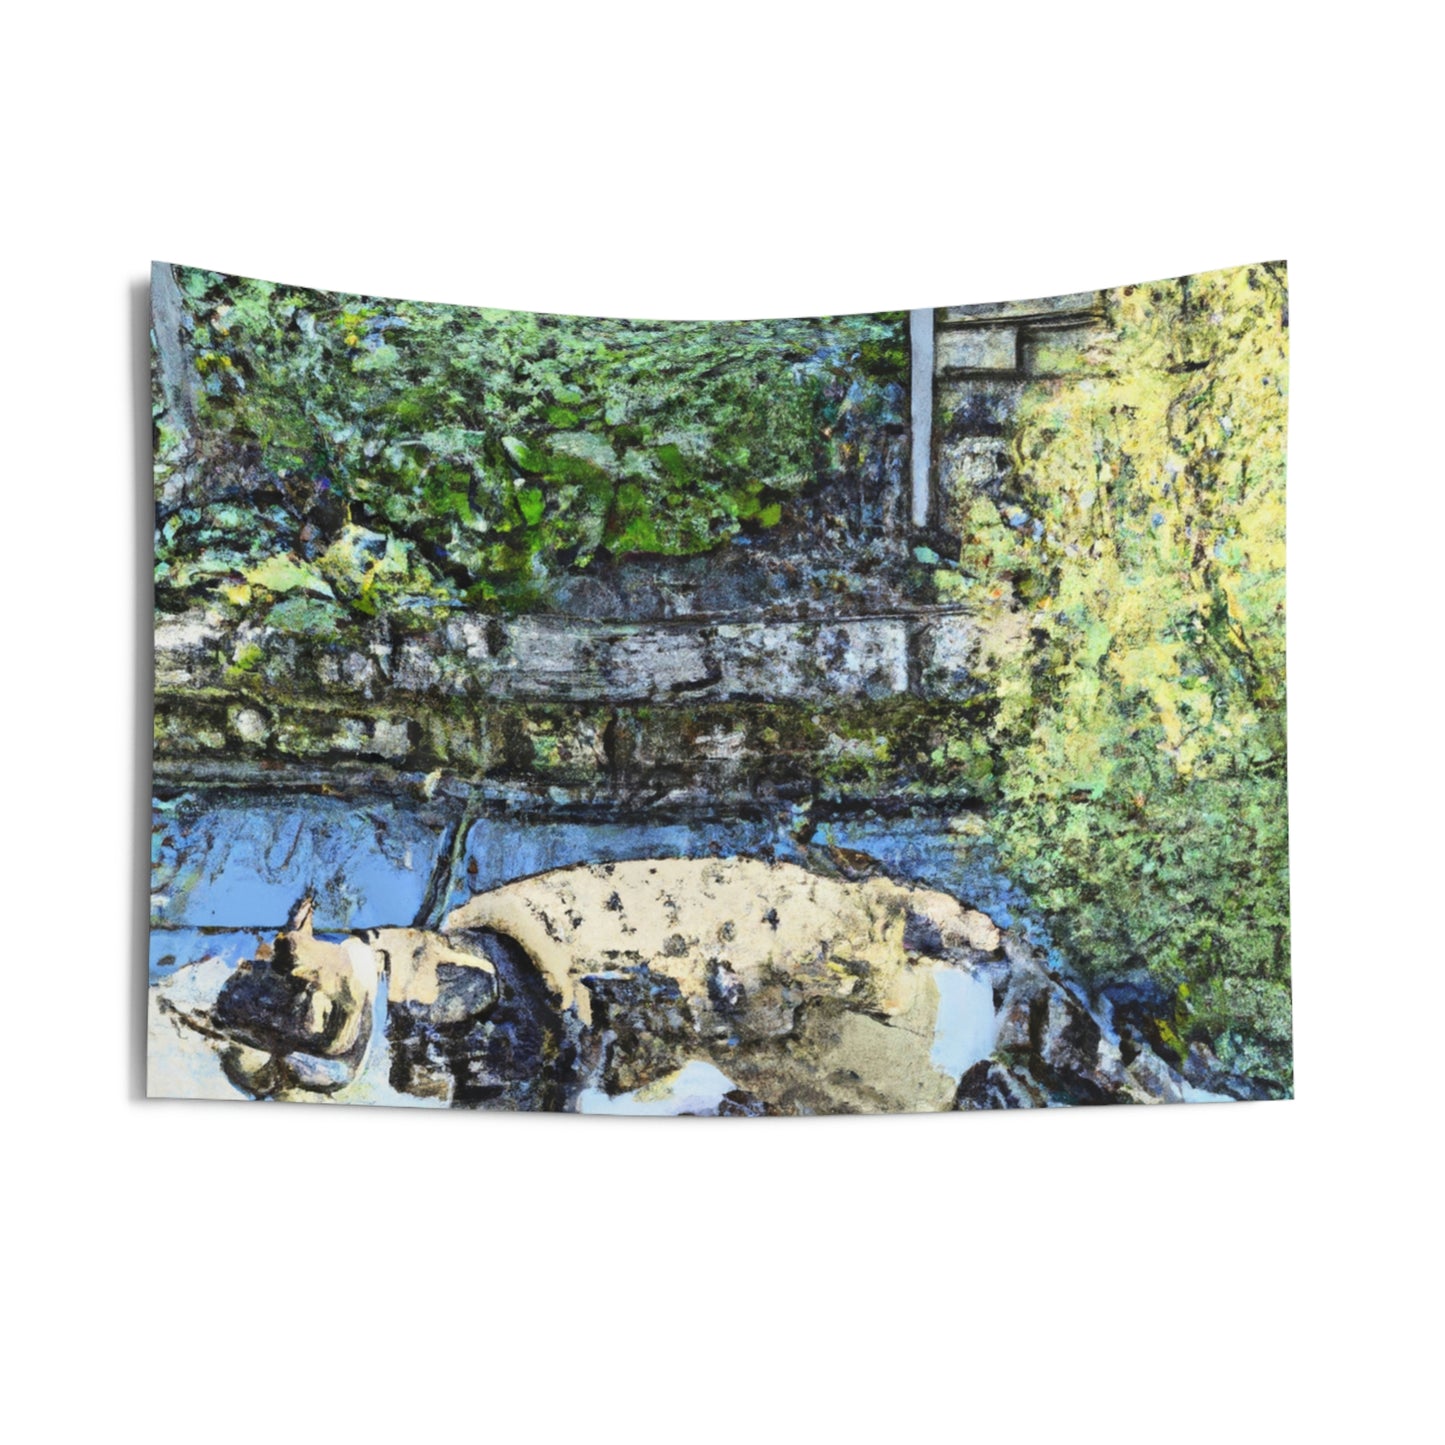 "A Cat's Life of Luxury" - The Alien Wall Tapestries